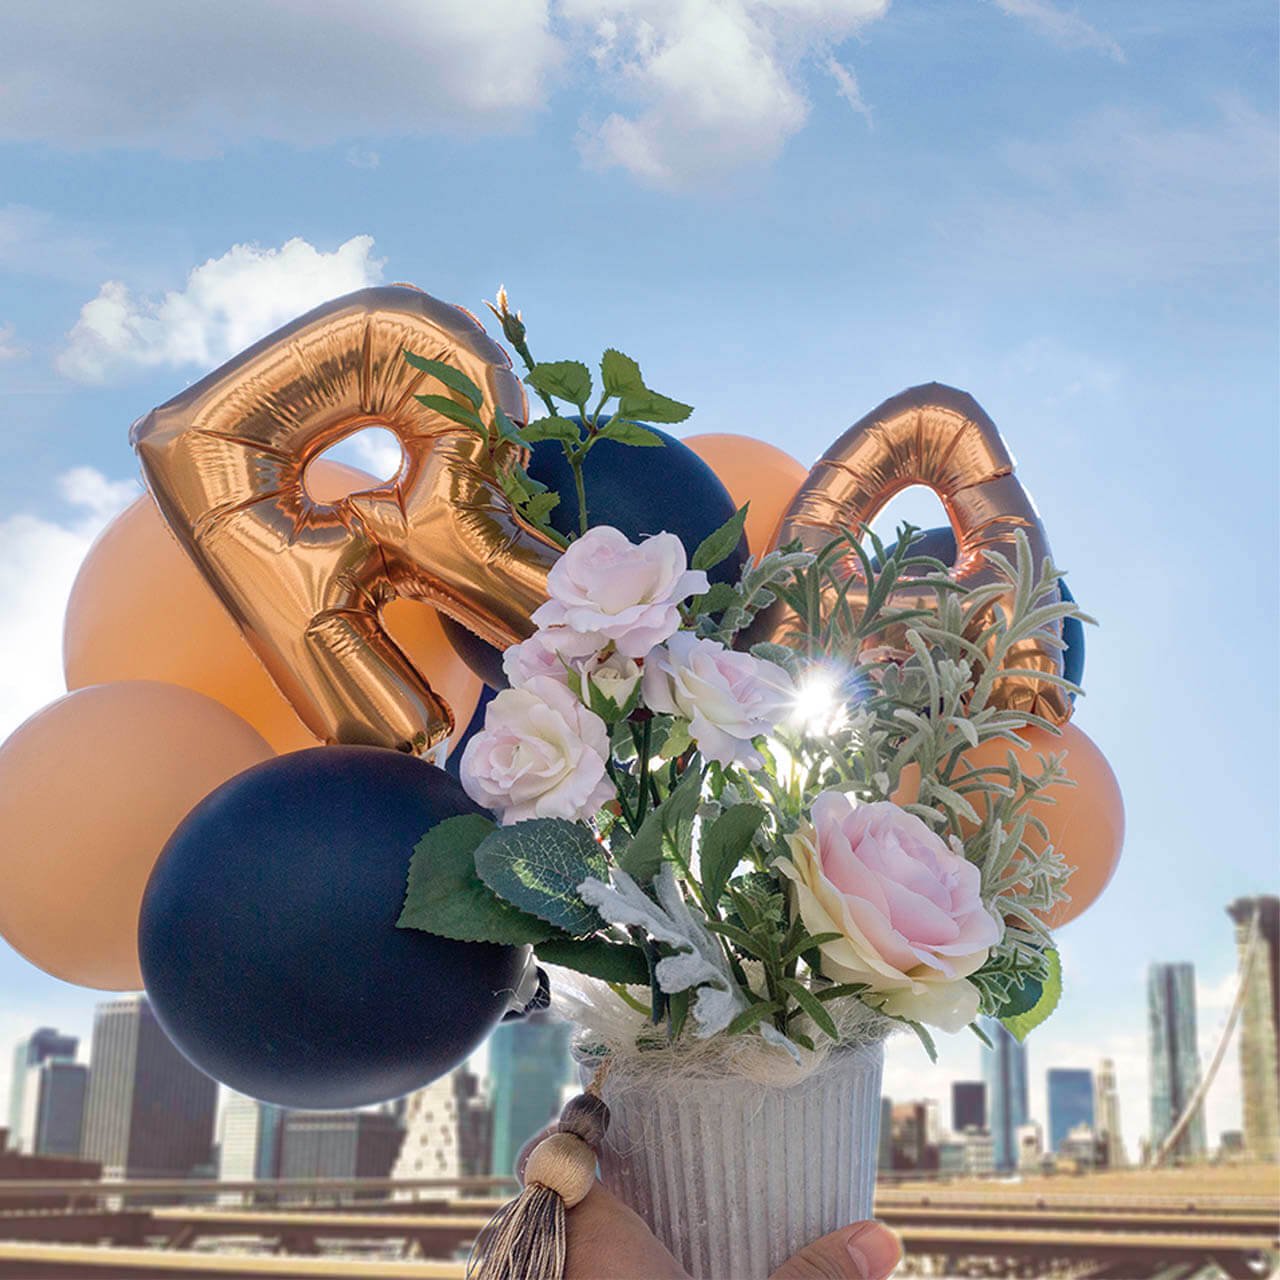 Brooklyn Park Garden Balloon Gift - Table top type - ブルックリンパークガーデンバルーンギフト